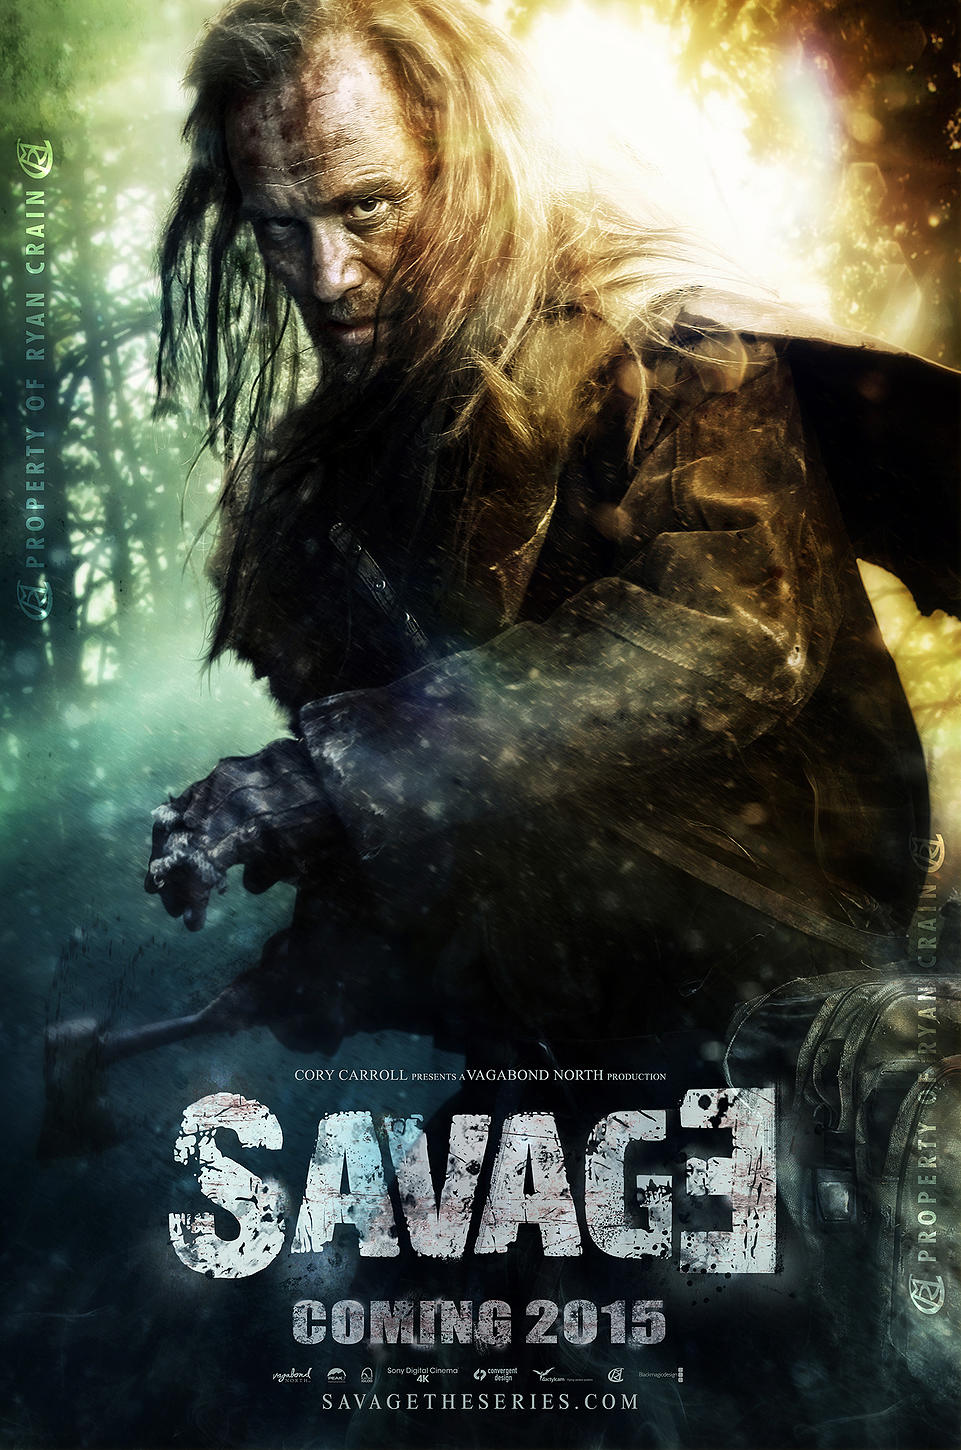 SAVAGE the SERIES poster starring Kevin T. Bennett